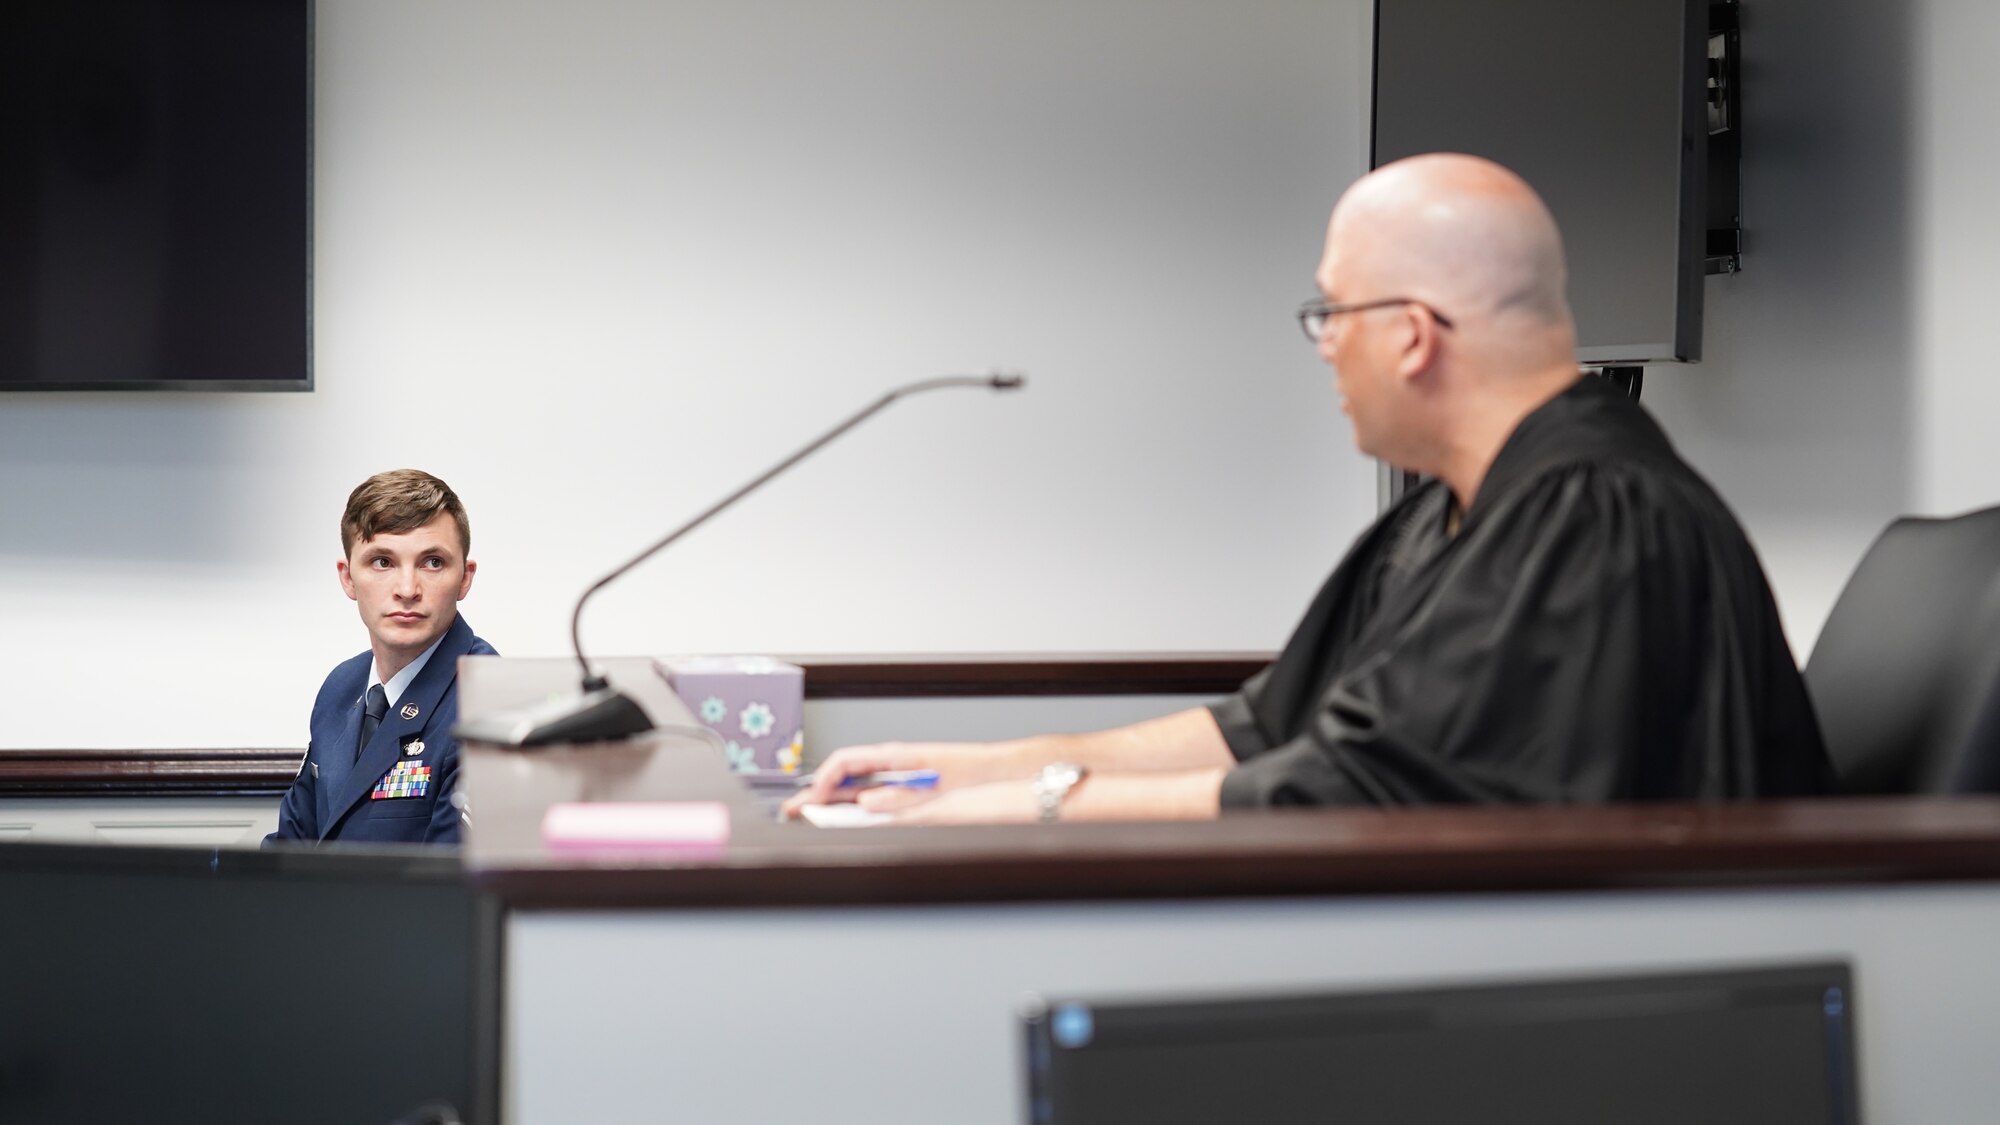 U.S. Air Force Staff Sgt. Brian Harper, 81st Security Forces Squadron member, receives feedback from a judge at a mock trial at Keesler Air Force Base, Mississippi, March 29, 2022. Harper participated in this legal training to ensure readiness should he ever be called for a court martial. (U.S. Air Force photo by Airman 1st Class Elizabeth Davis)